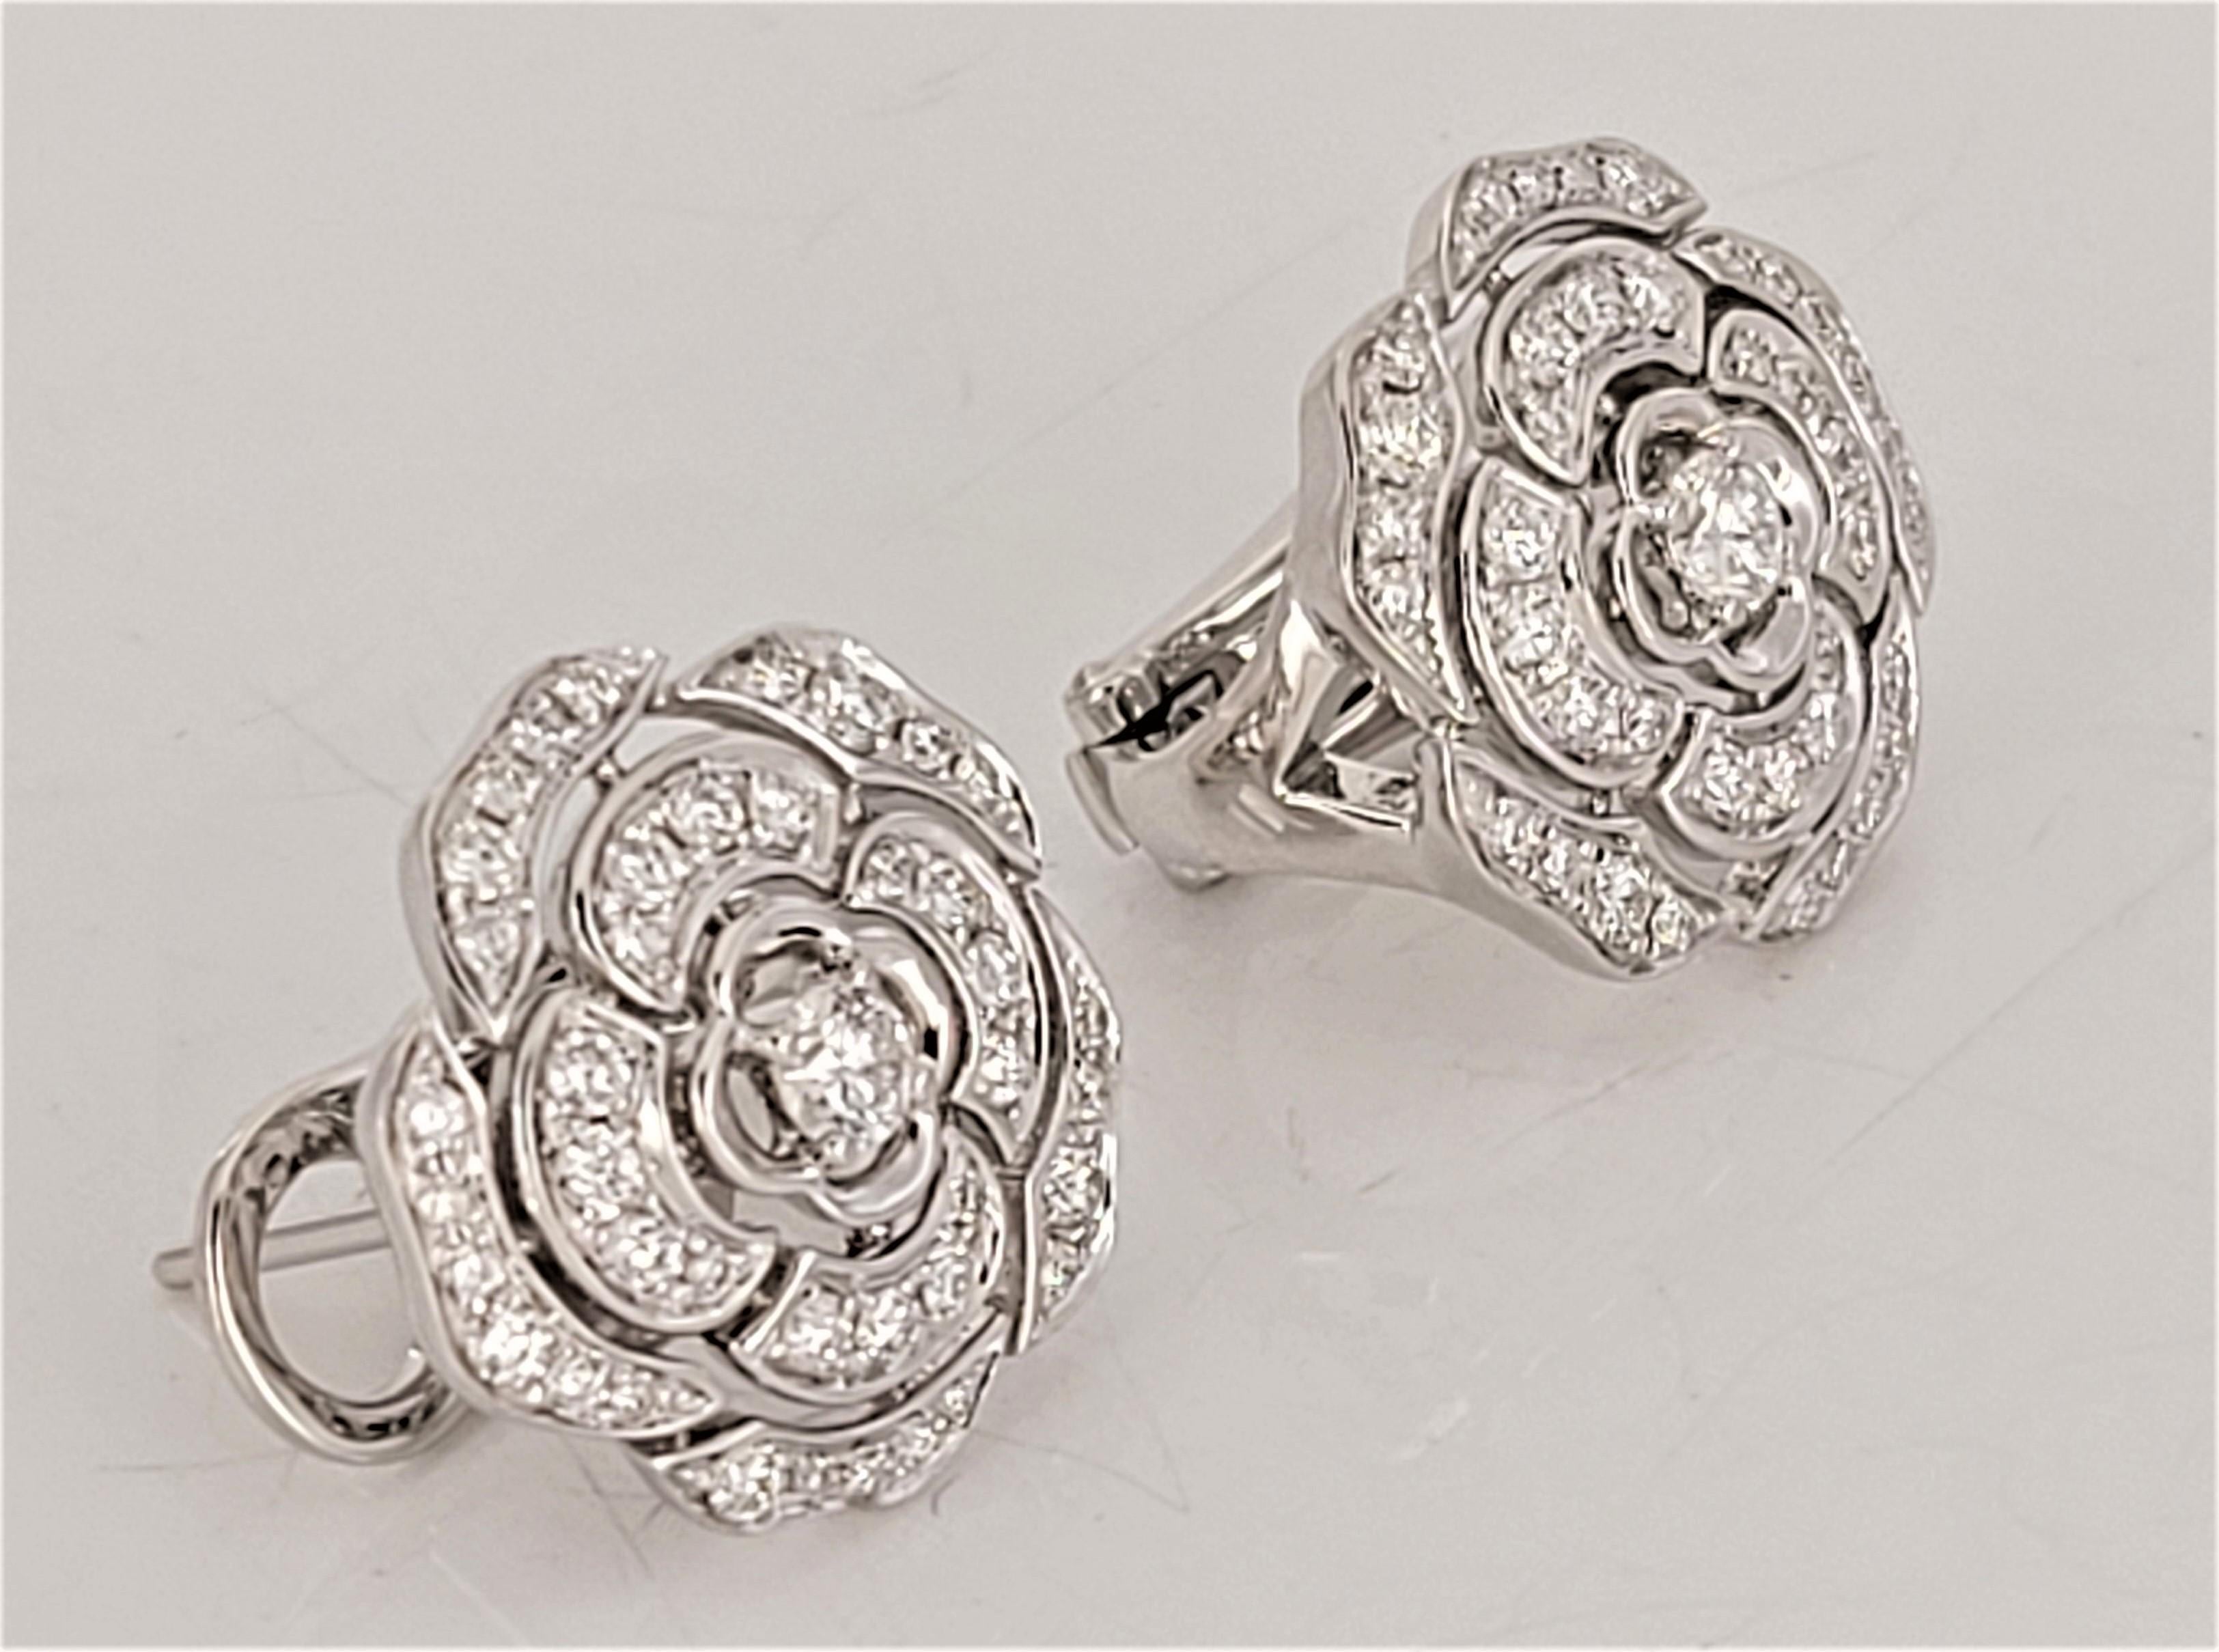 Brand Chanel 
18K White Gold
Diamonds- 82pcs,  Dia:0.665ct 
Dimension 14.5x14.5mm
Earring Weight 7.26g
Gender Women
Condition New, never worn